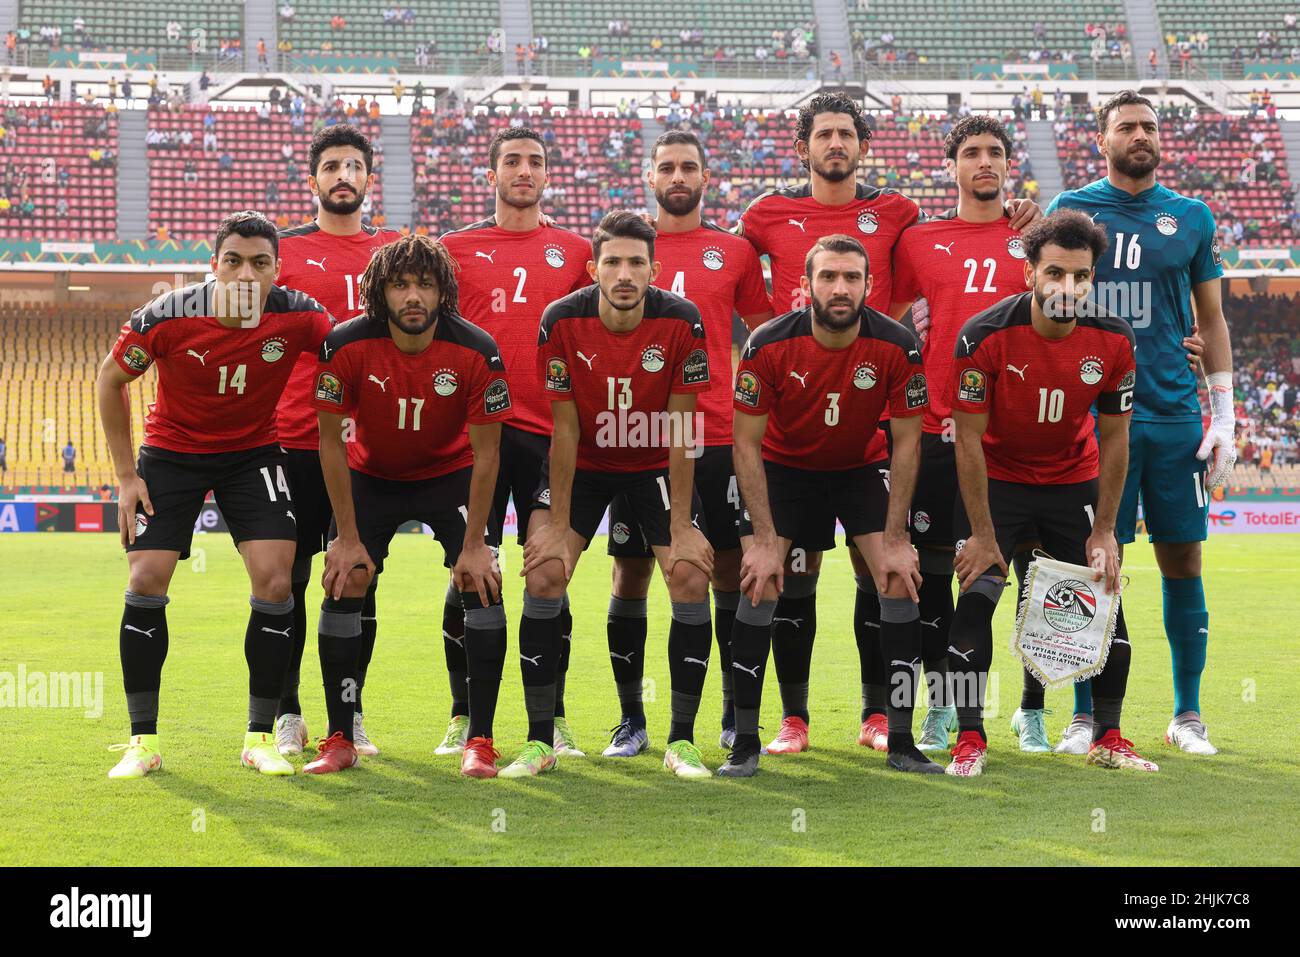 Cameroon, Yaounde, January 30 2022 - National team of Egypt pose for team photo from top left: Ayman Ashraf, Mohamed Abdelmonem, Amr El Solia, Ahmed Hegazy, Omar Marmoush, Gabaski, from bottom left: Mostafa Mohamed, Mohamed Elneny, Ahmed El Fotouh, Omar Kamal, Mohamed Salah during the Africa Cup of Nations - Play Offs - Quarter-finals match between Egypt and Morocco at Stade Ahmadou Ahidjo, Yaounde, Cameroon, 30/01/2022. Photo SF Credit: Sebo47/Alamy Live News Stock Photo